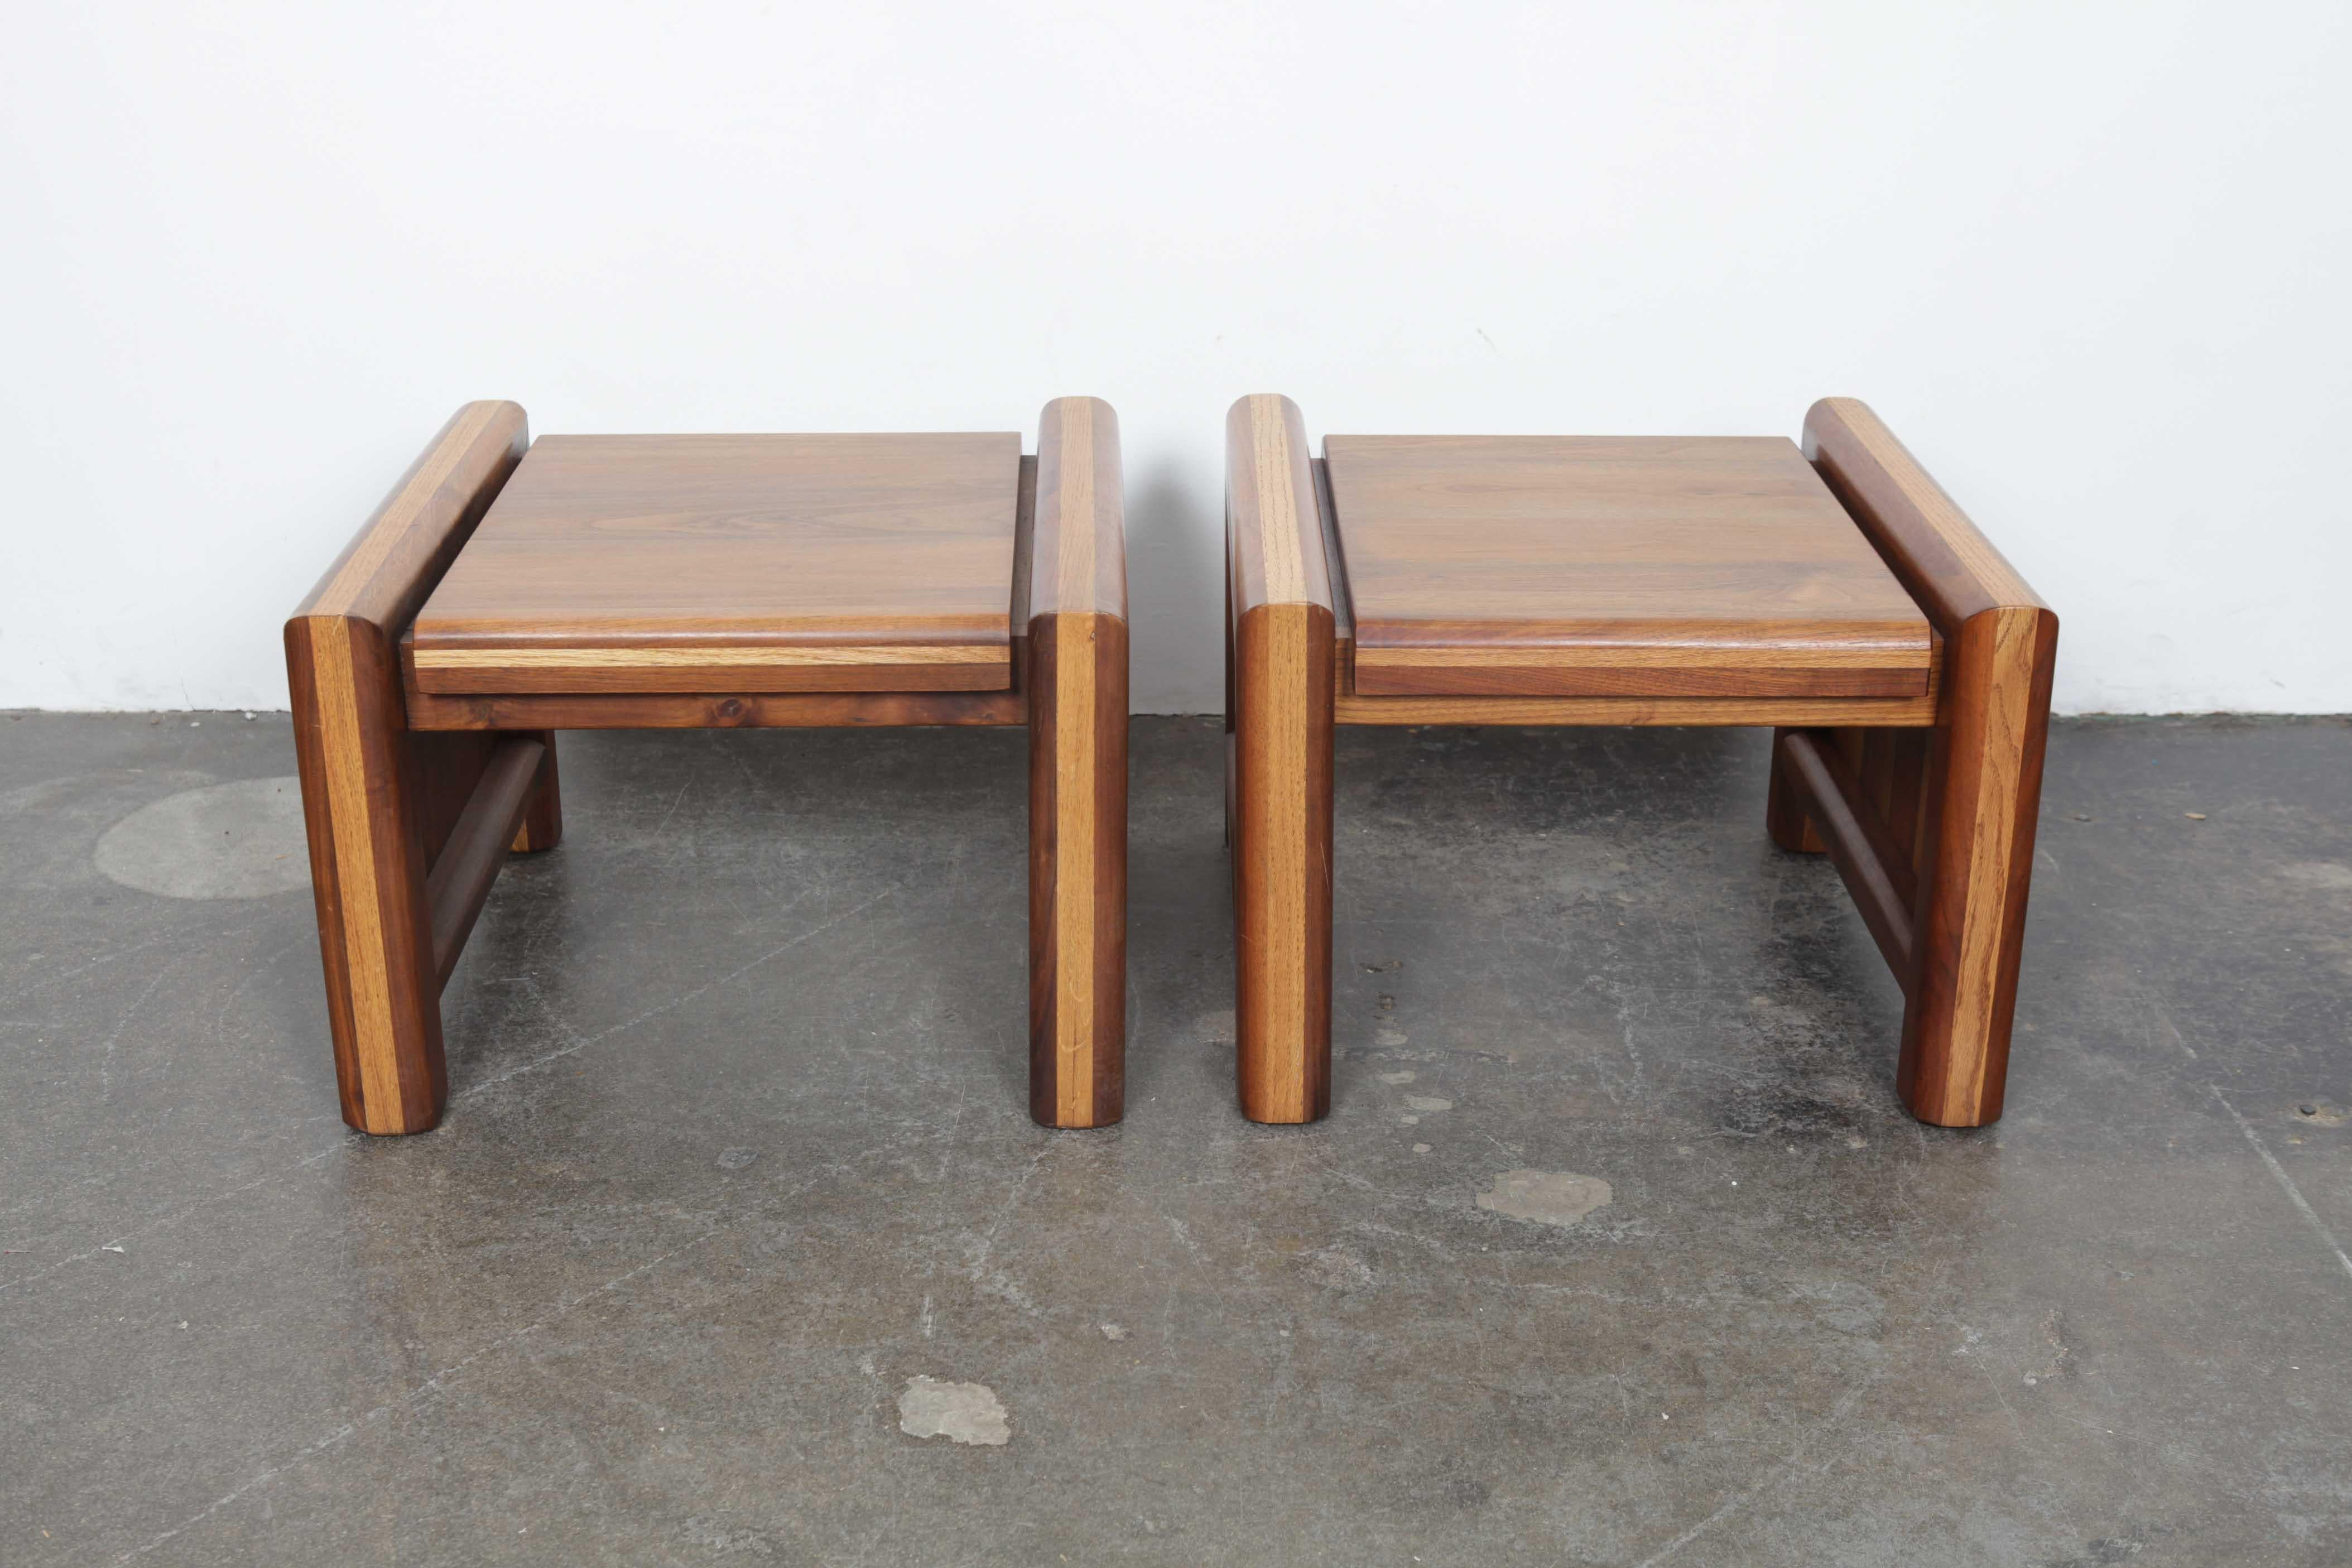 Pair of American made 1970s multi-tone walnut end tables with rounded legs and solid sides. Designer and maker are unknown.